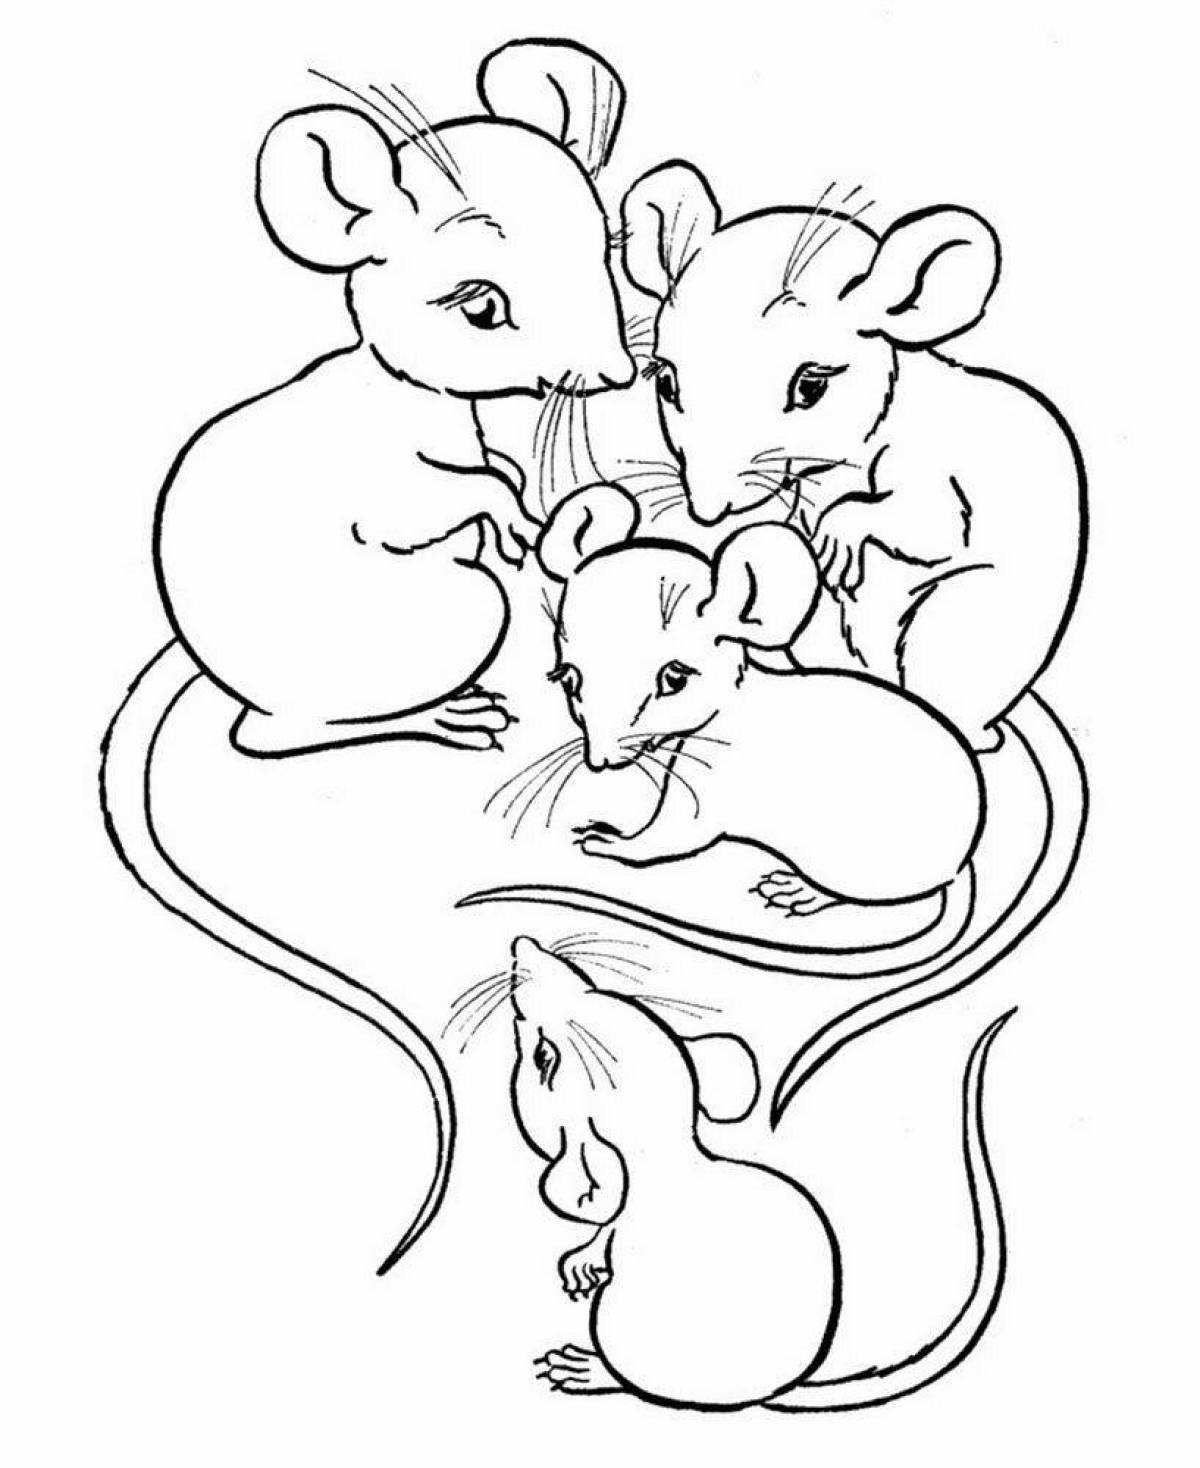 Coloring page dazzling little mouse